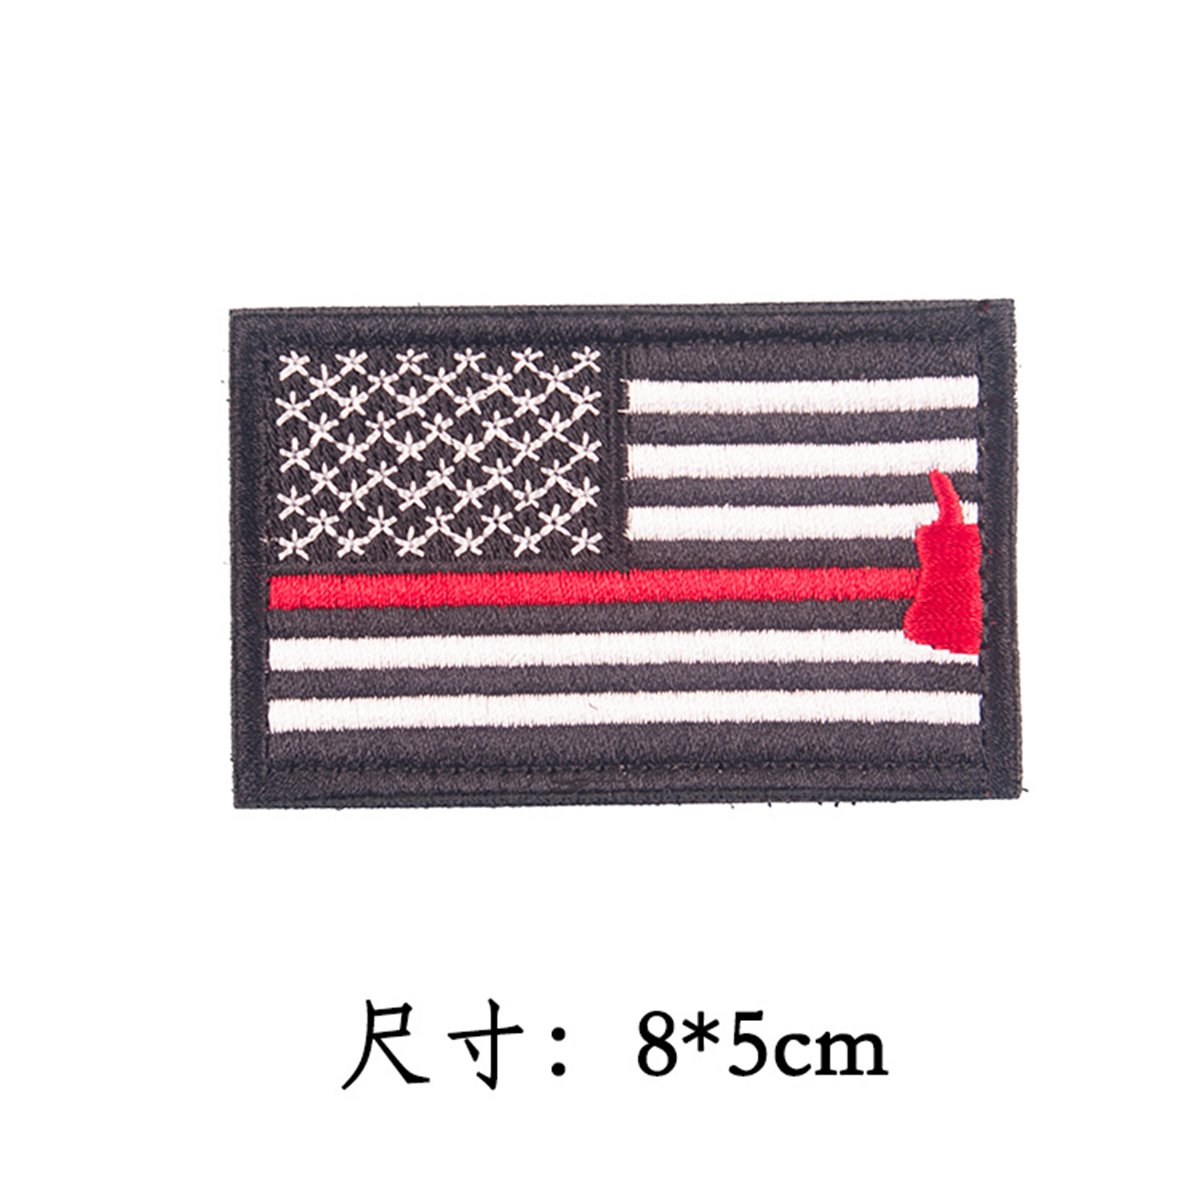 Embroidered American Flag Clothing Accessories Velcro Backpack Decorative Badge USA Armband Patch Sticker